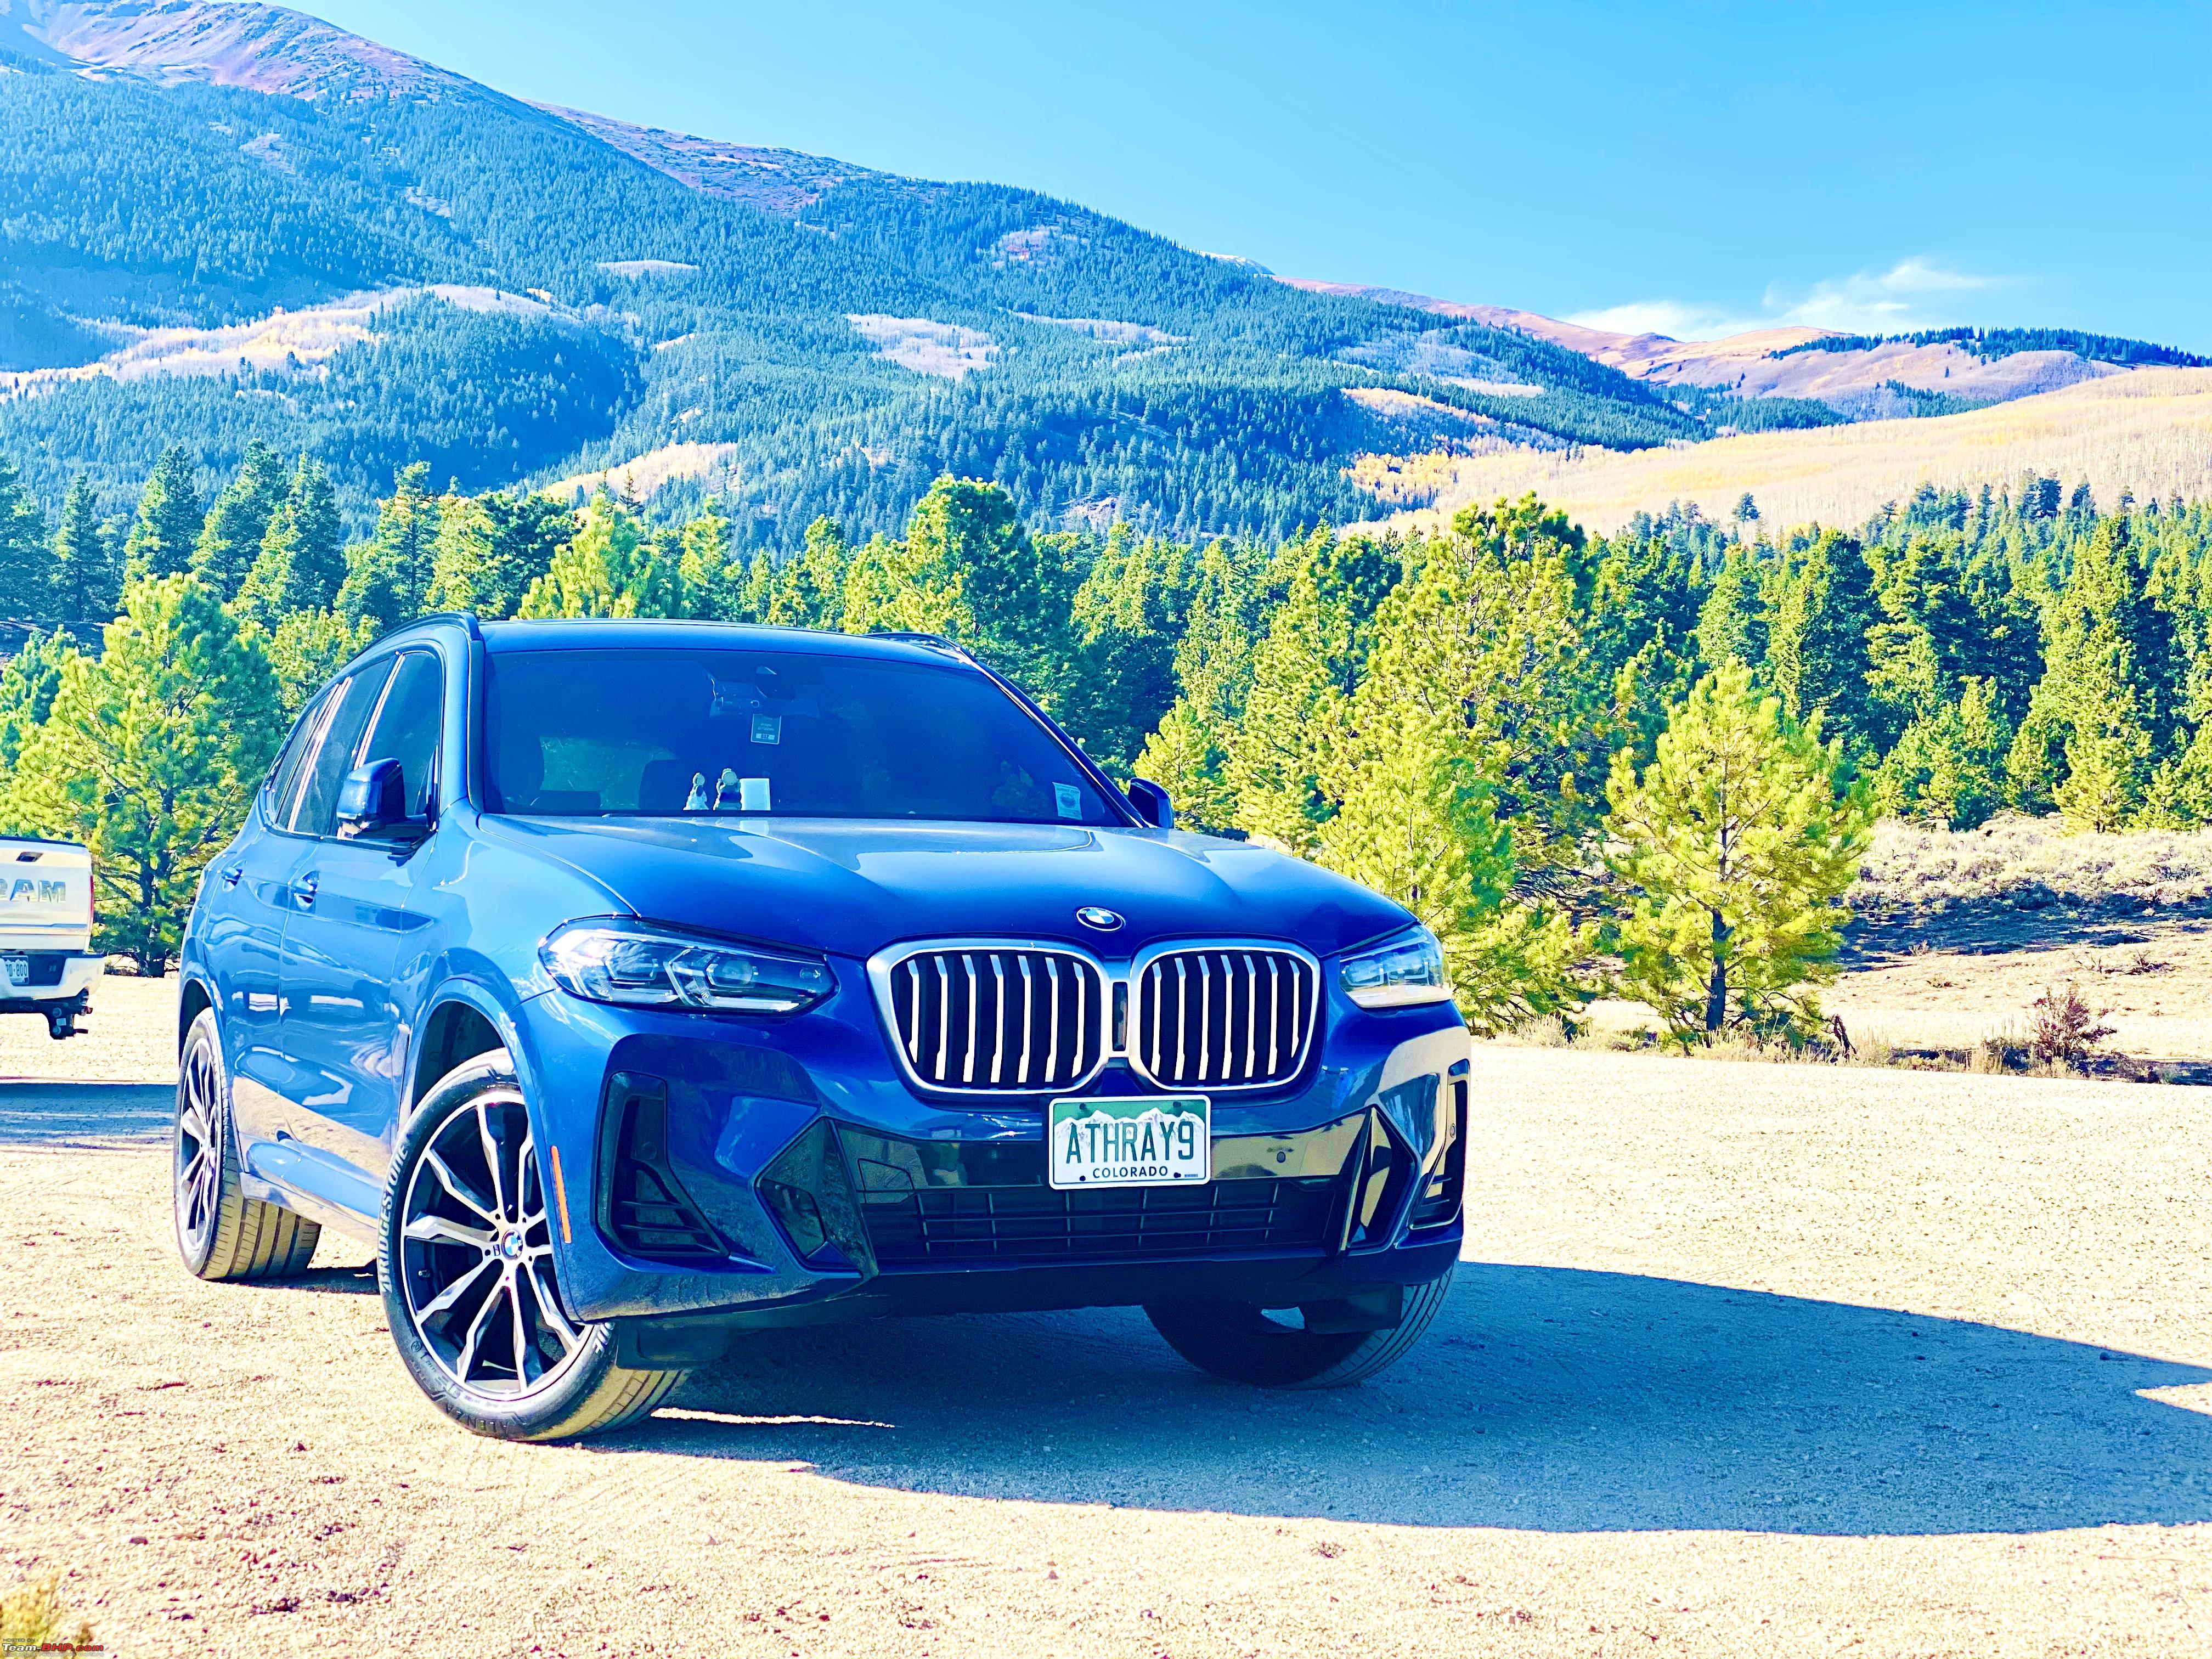 https://www.team-bhp.com/forum/attachments/test-drives-initial-ownership-reports/2505305d1695057683-owned-bmw-x3-30i-xdrive-just-16-months-sold-replaced-x3-m40i-img_6013.jpg